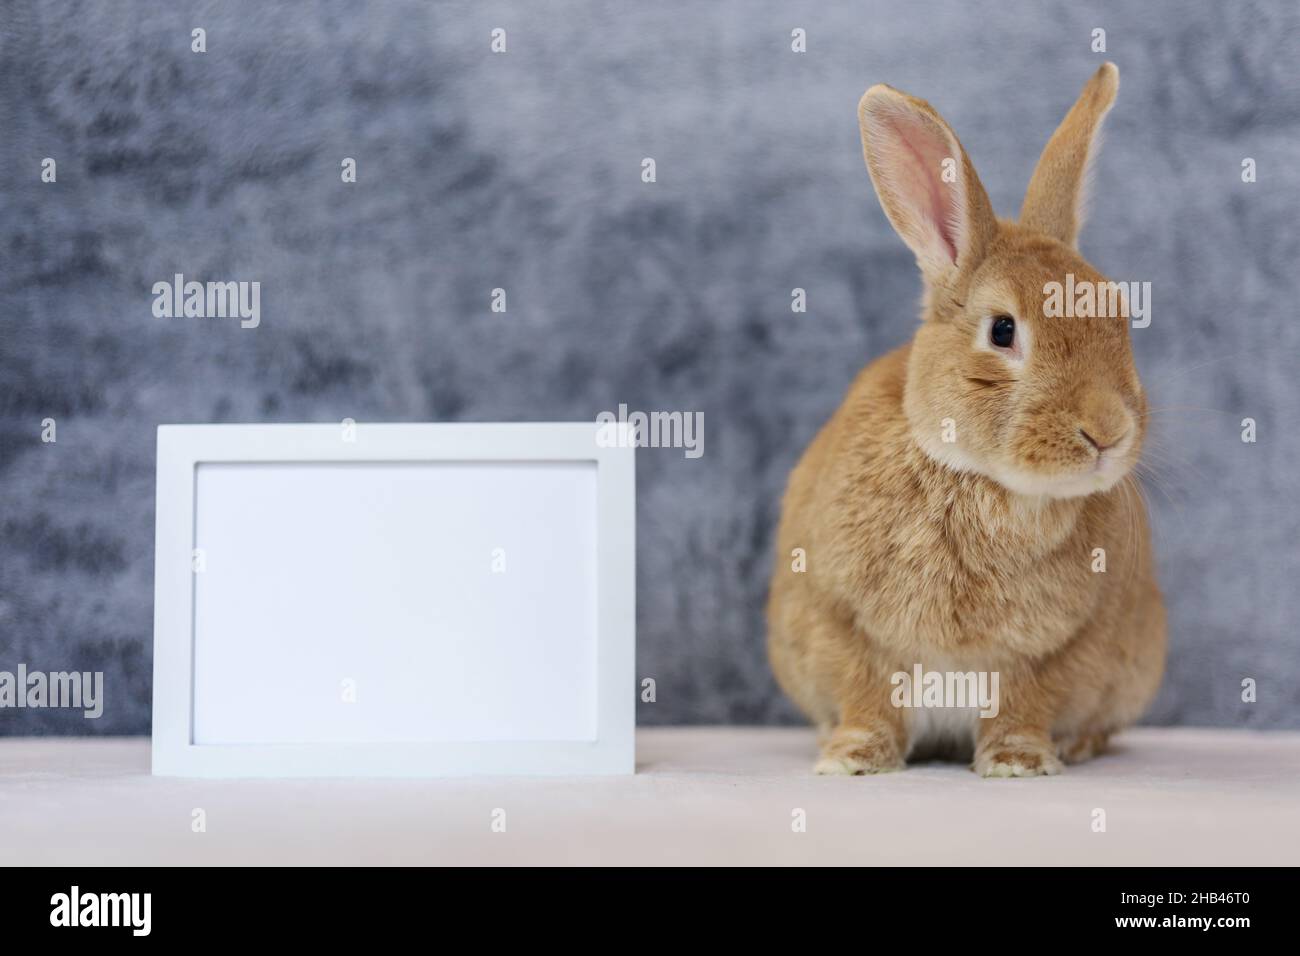 Rufus Rabbit poses next to white picture frame mockup with gray plush background copy space on left Stock Photo